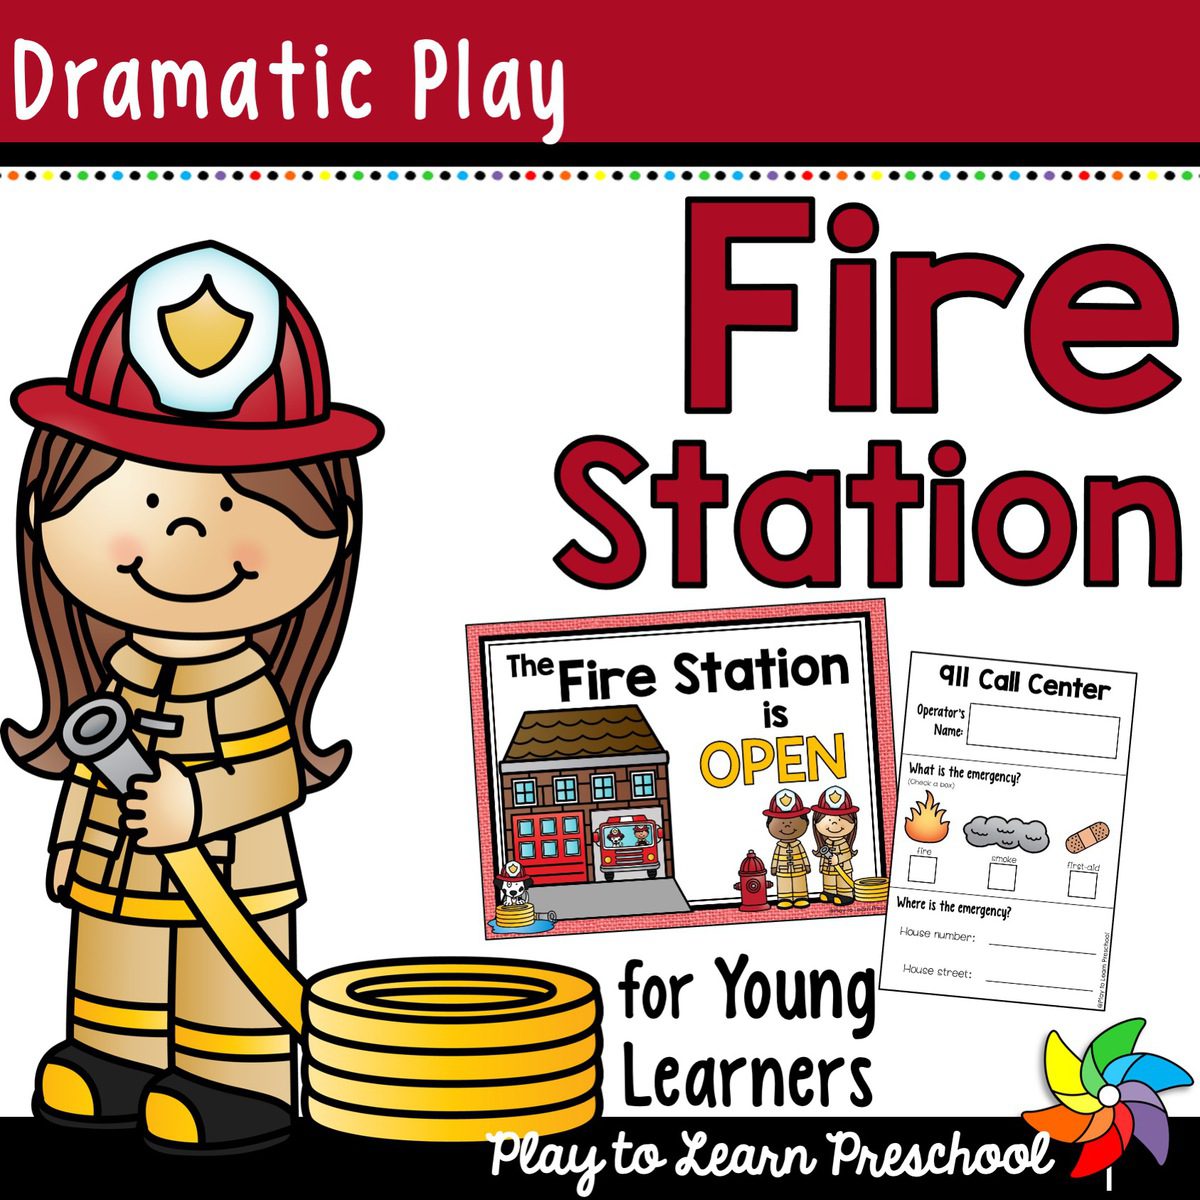 fire-station-dramatic-play-play-to-learn-preschool